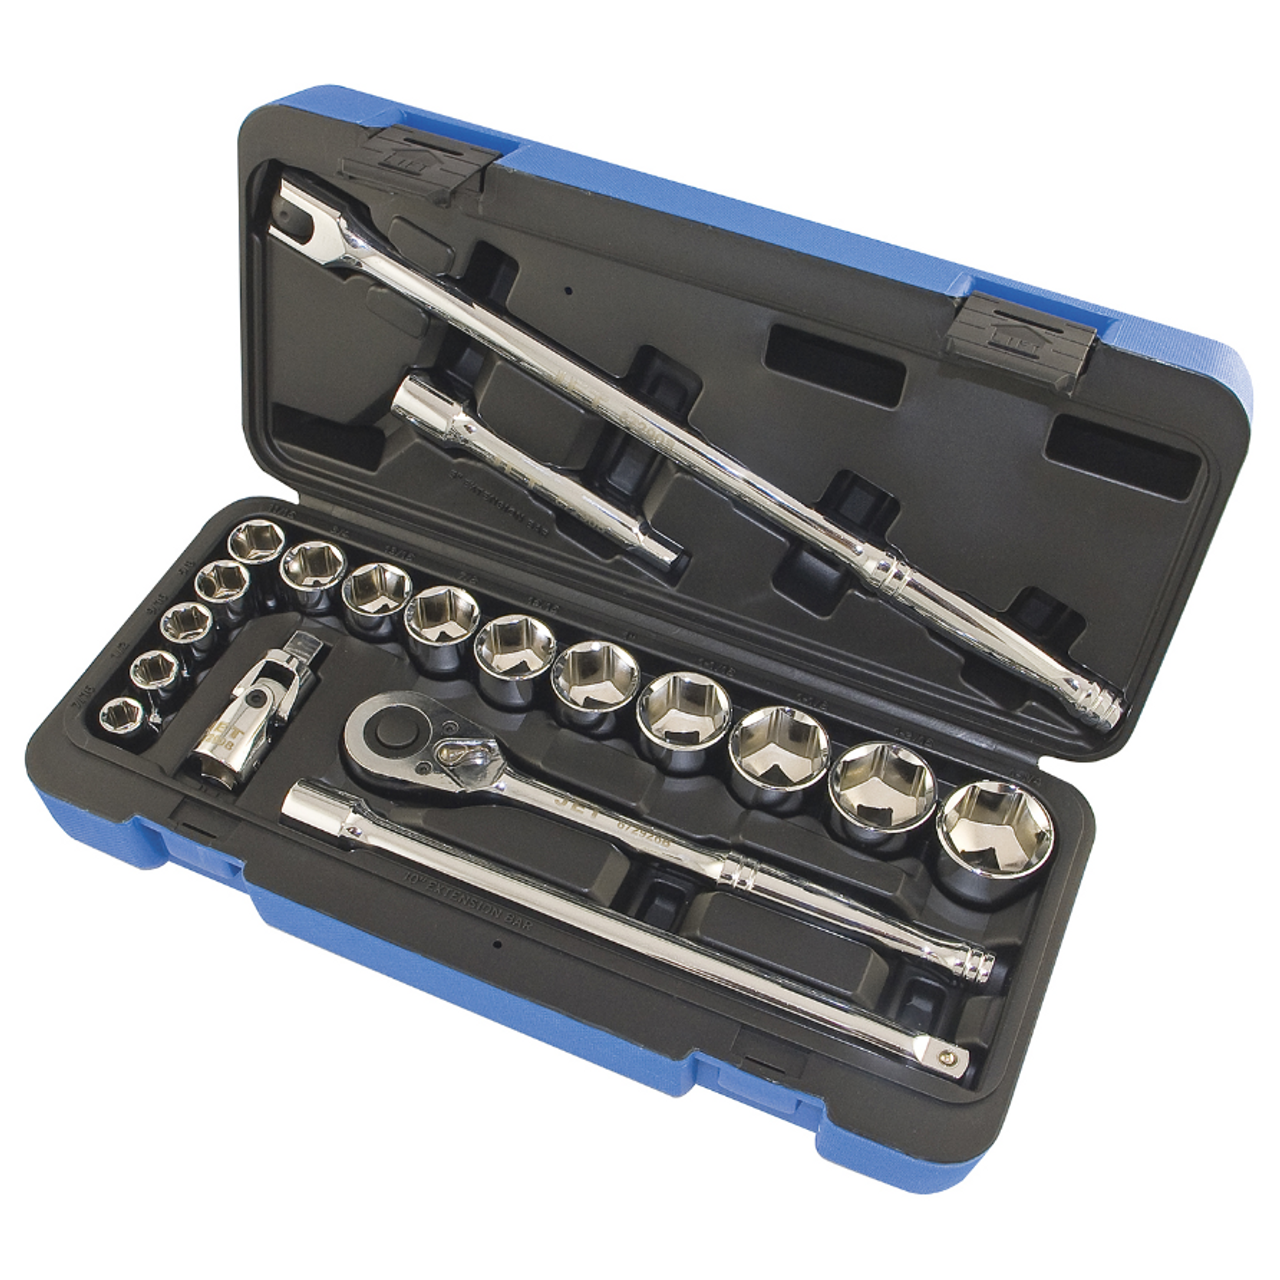 20 Pc. 1/2" Drive SAE Socket Wrench Set - 6 Point  600323